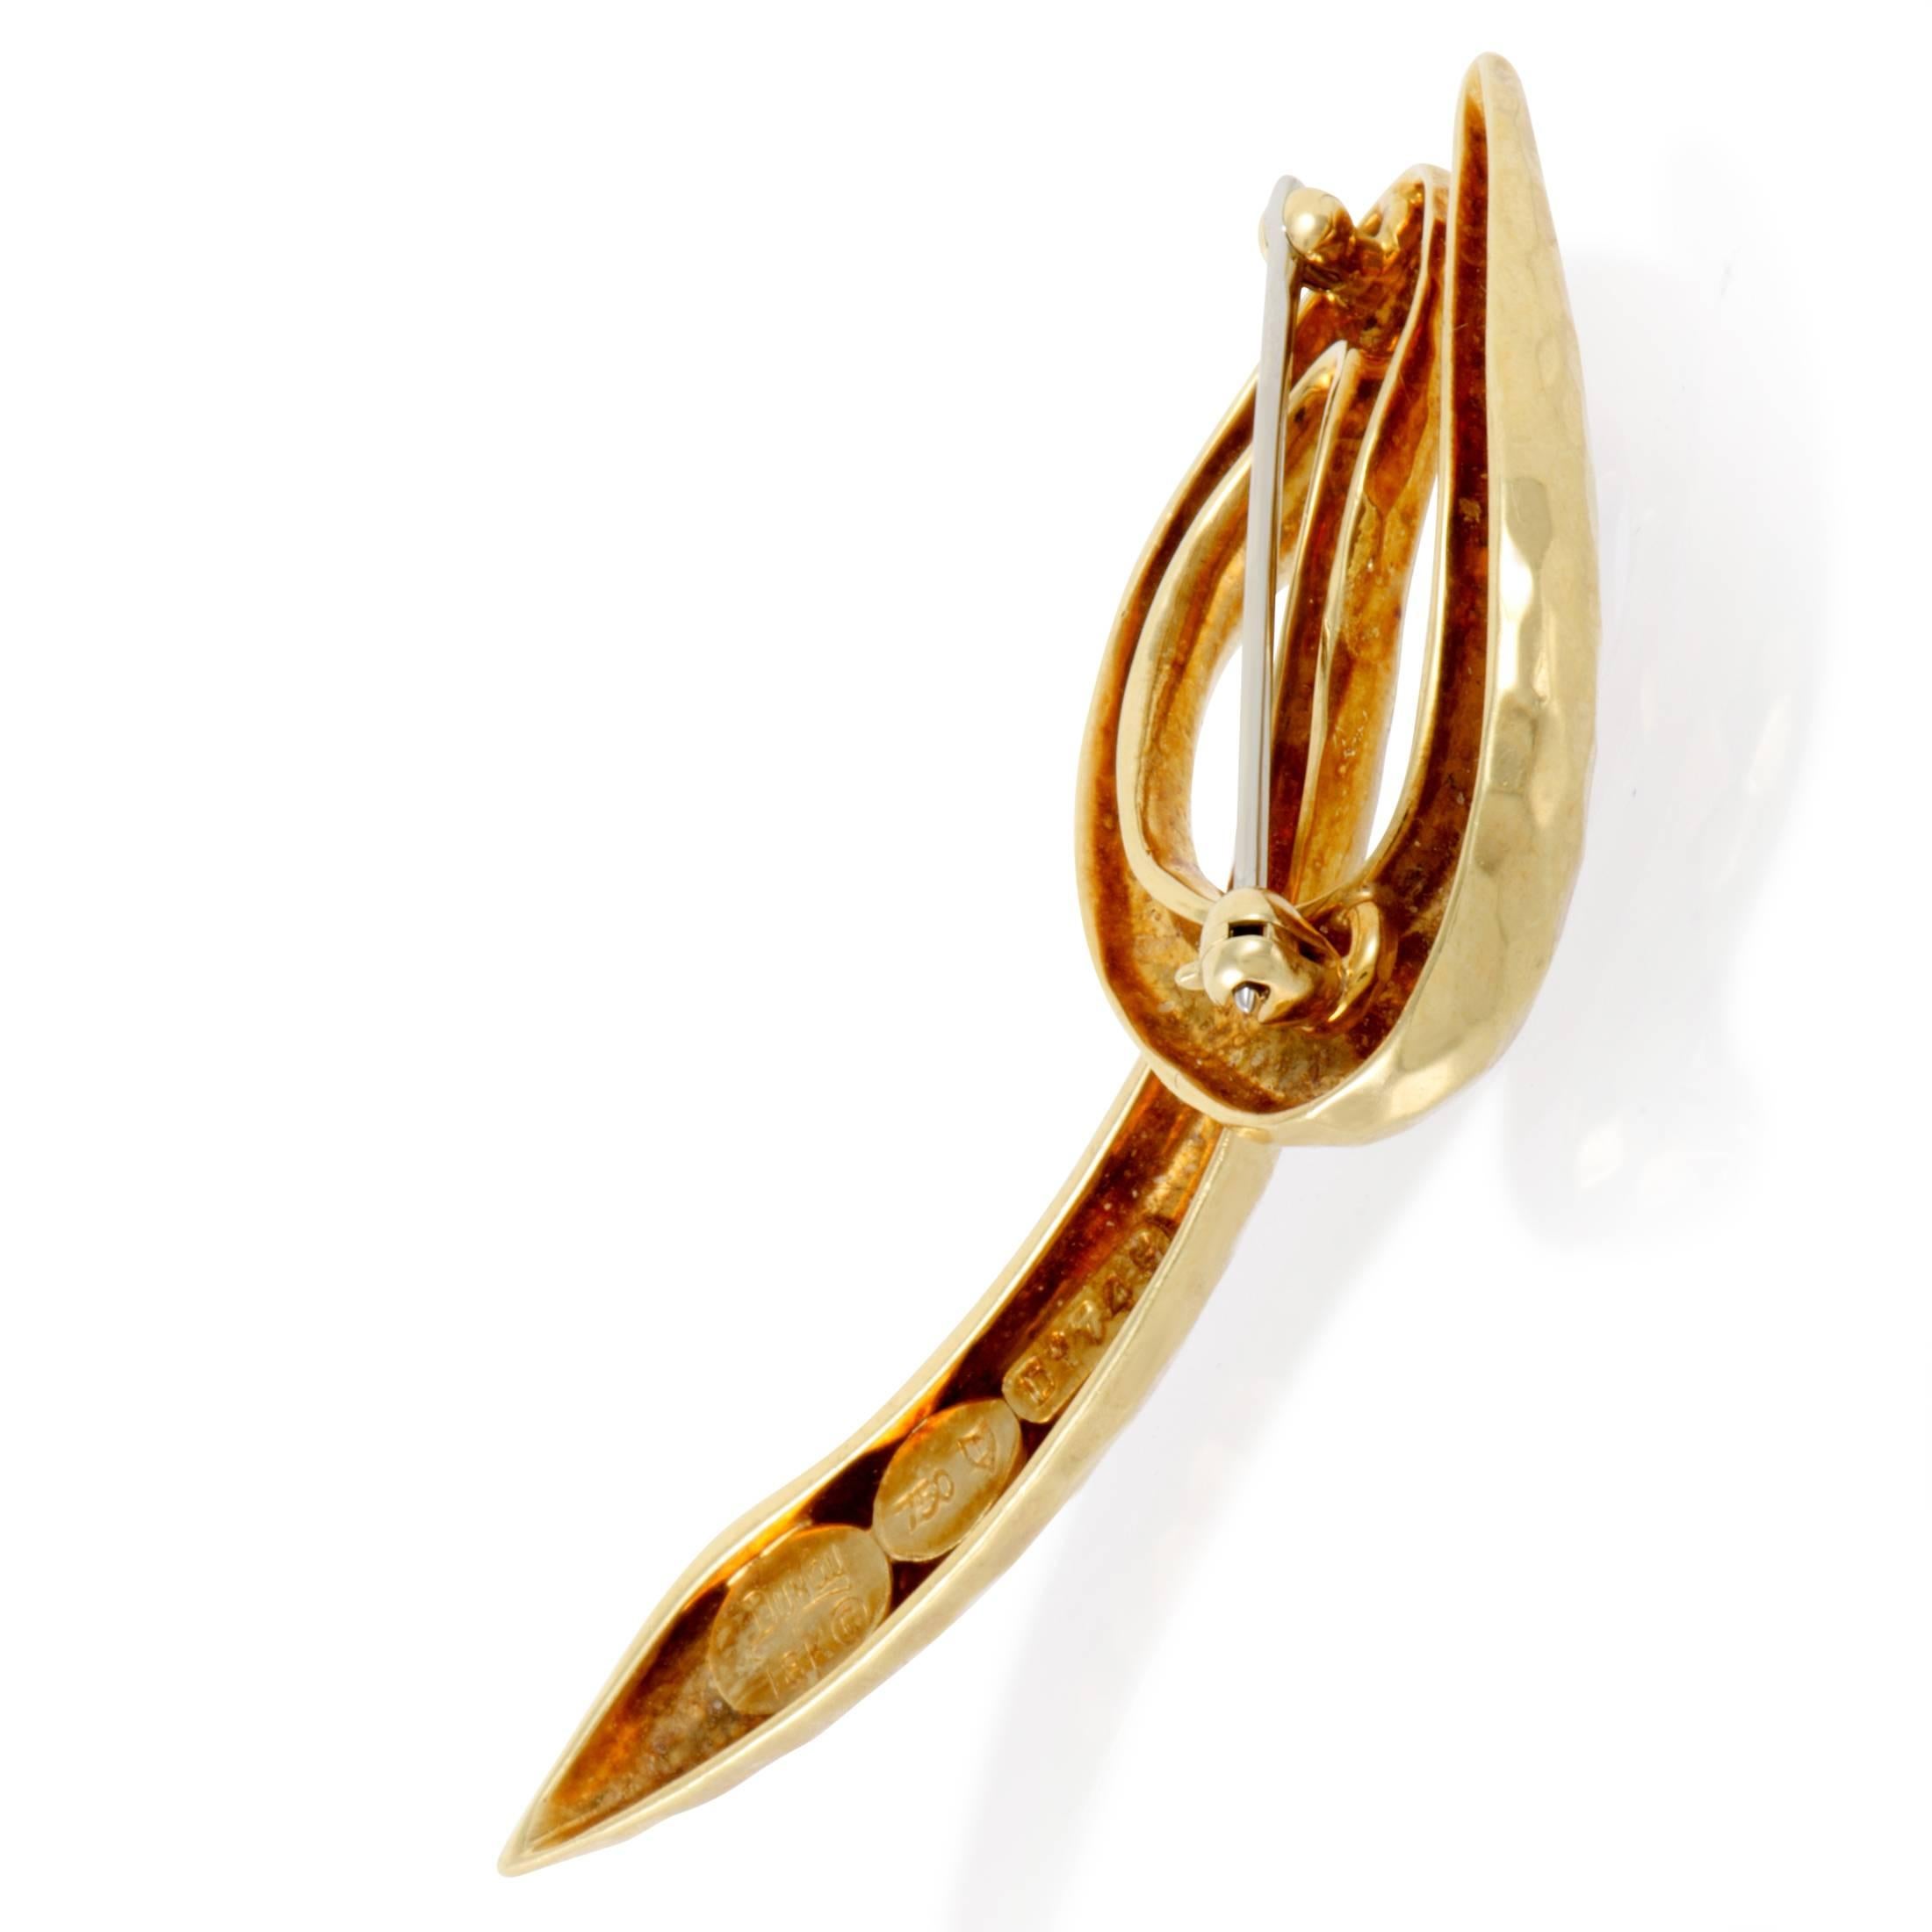 Delightfully graceful shape made of radiant 18K yellow gold is exquisitely polished and marvelously faceted to produce alluring play of light in this fabulous brooch from Henry Dunay which exudes an aura of aesthetic minimalism.